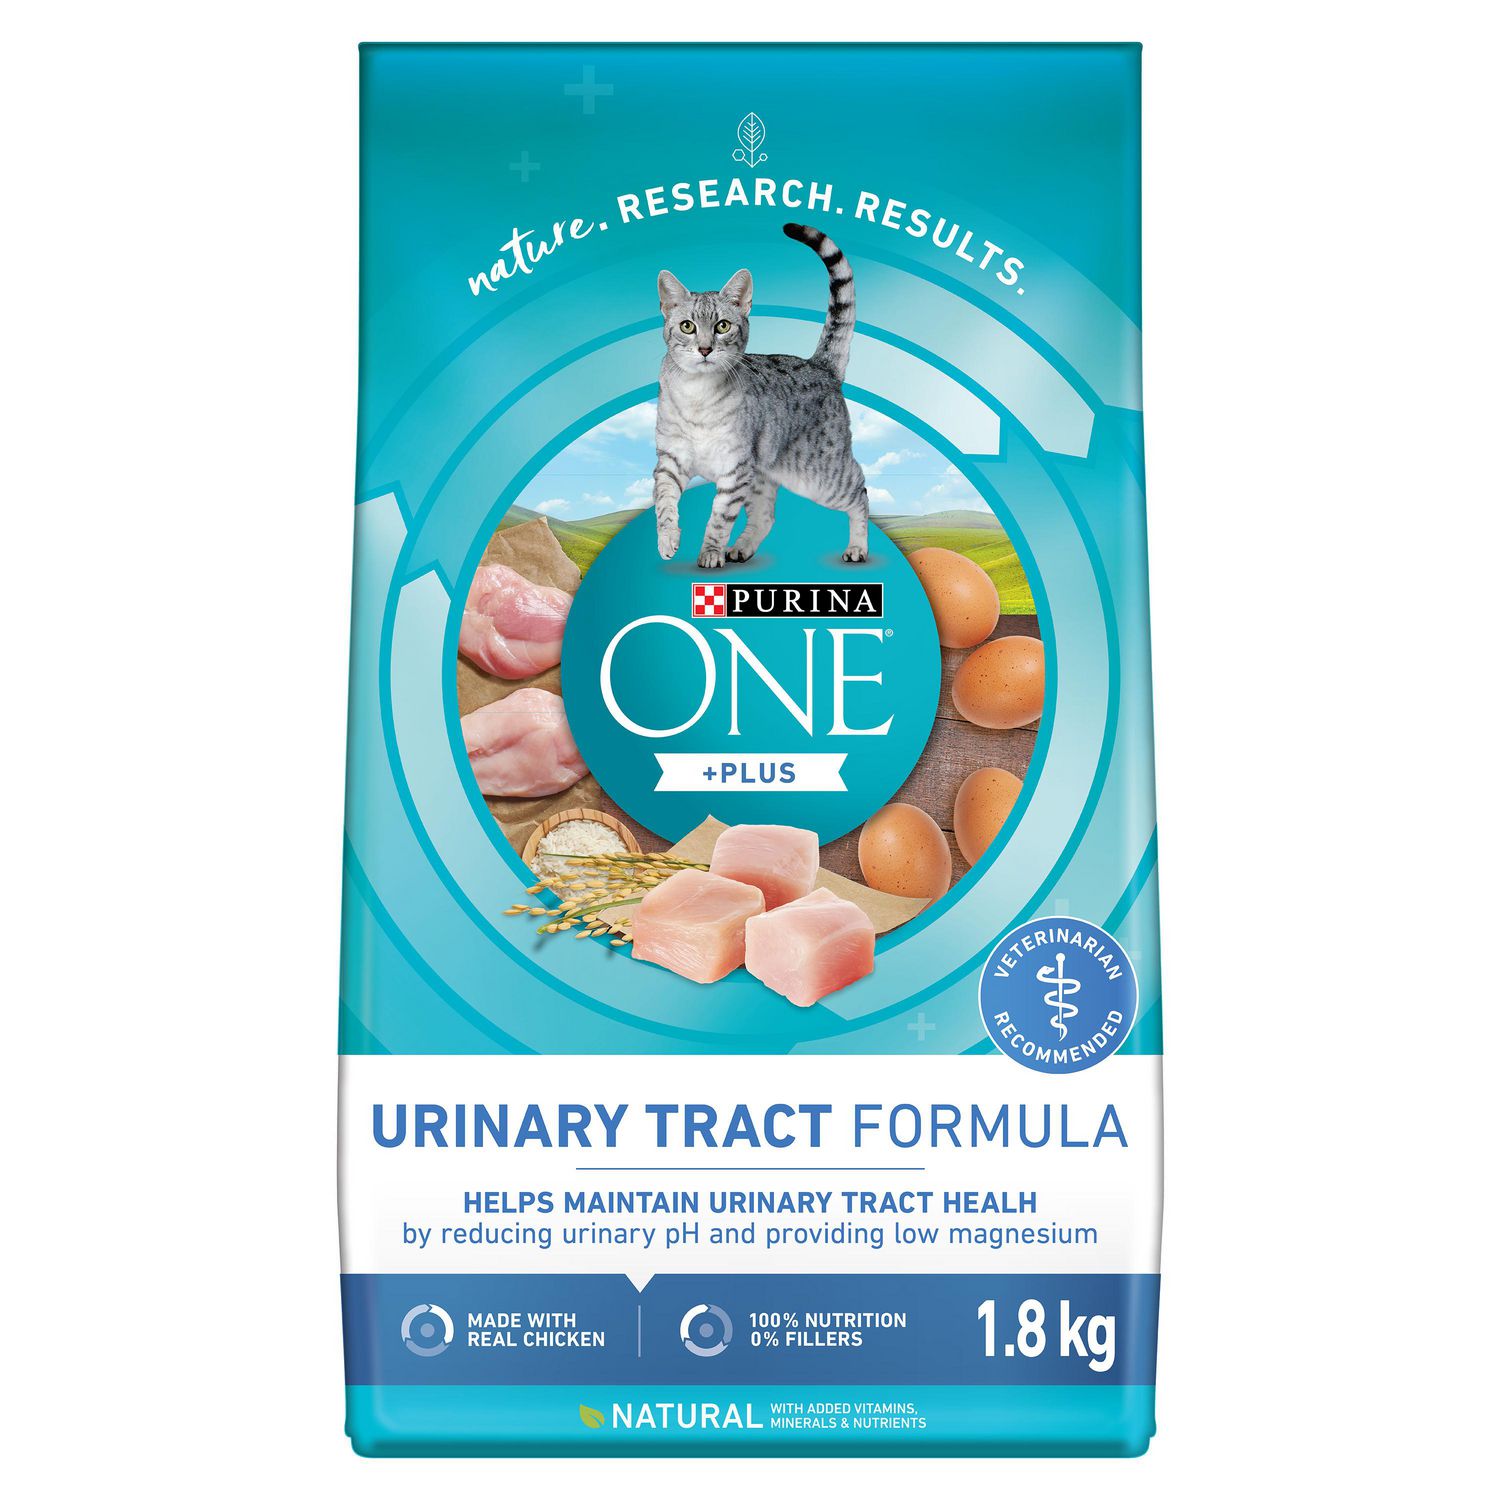 Purina ONE +Plus Urinary Tract Formula Chicken, Dry Cat Food 1.8